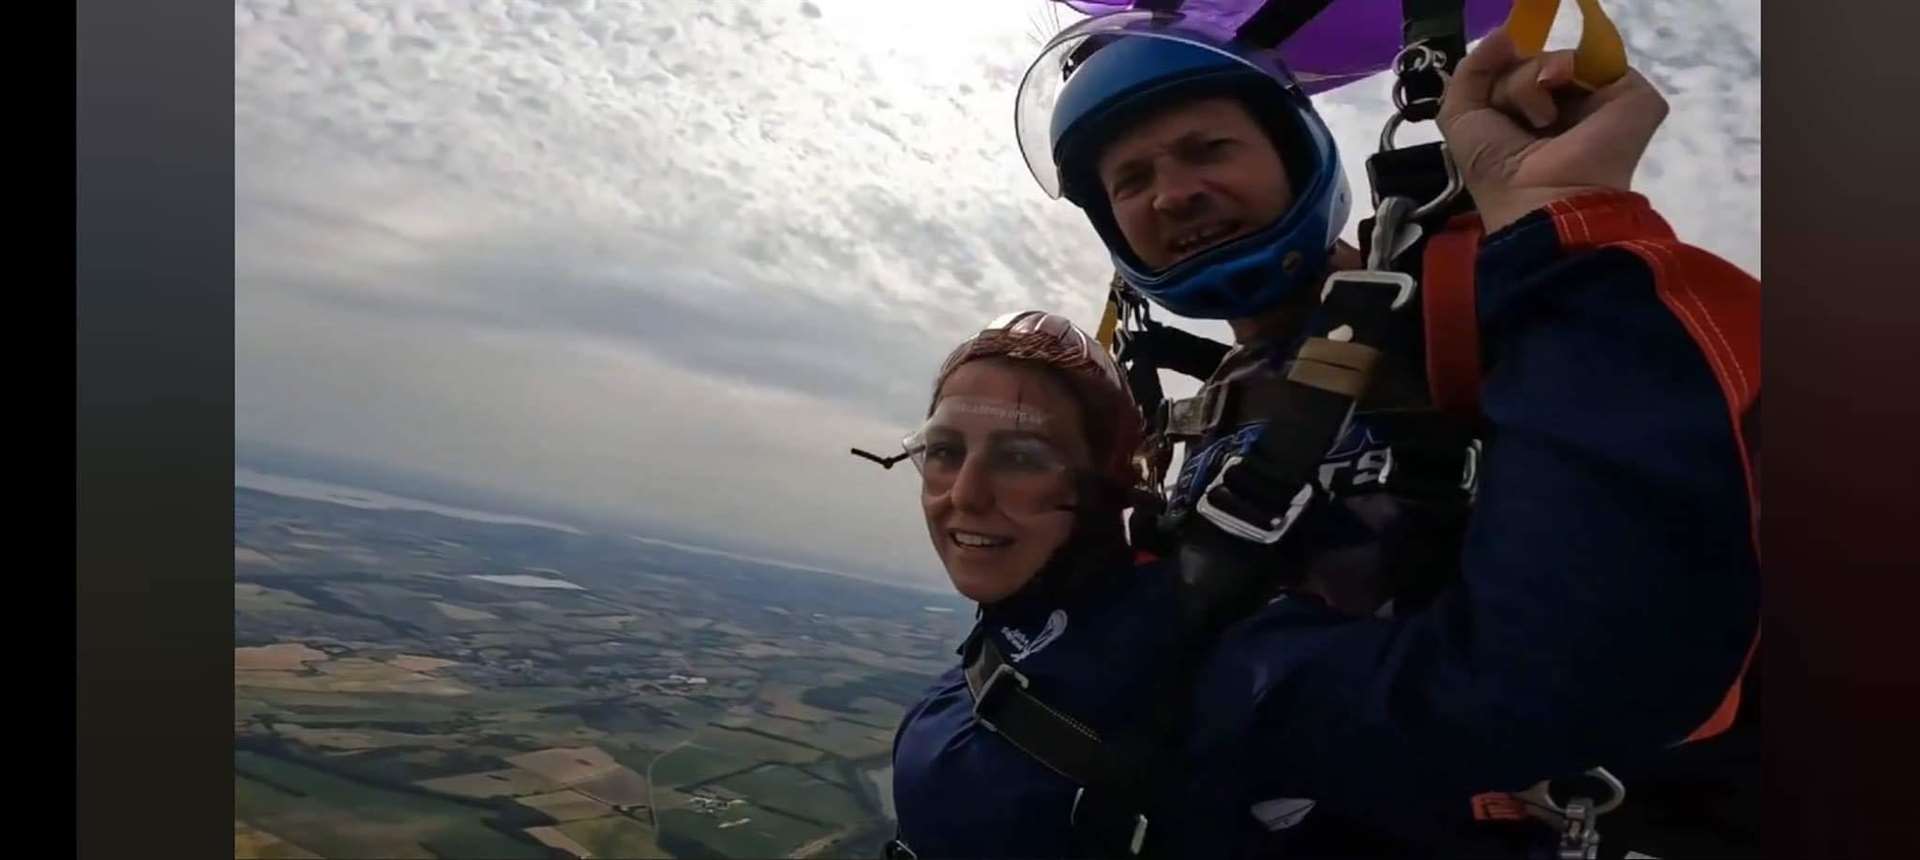 Eilidh and Kirsty completed an epic skydive in memory of their late brother Ryan Mackenzie.